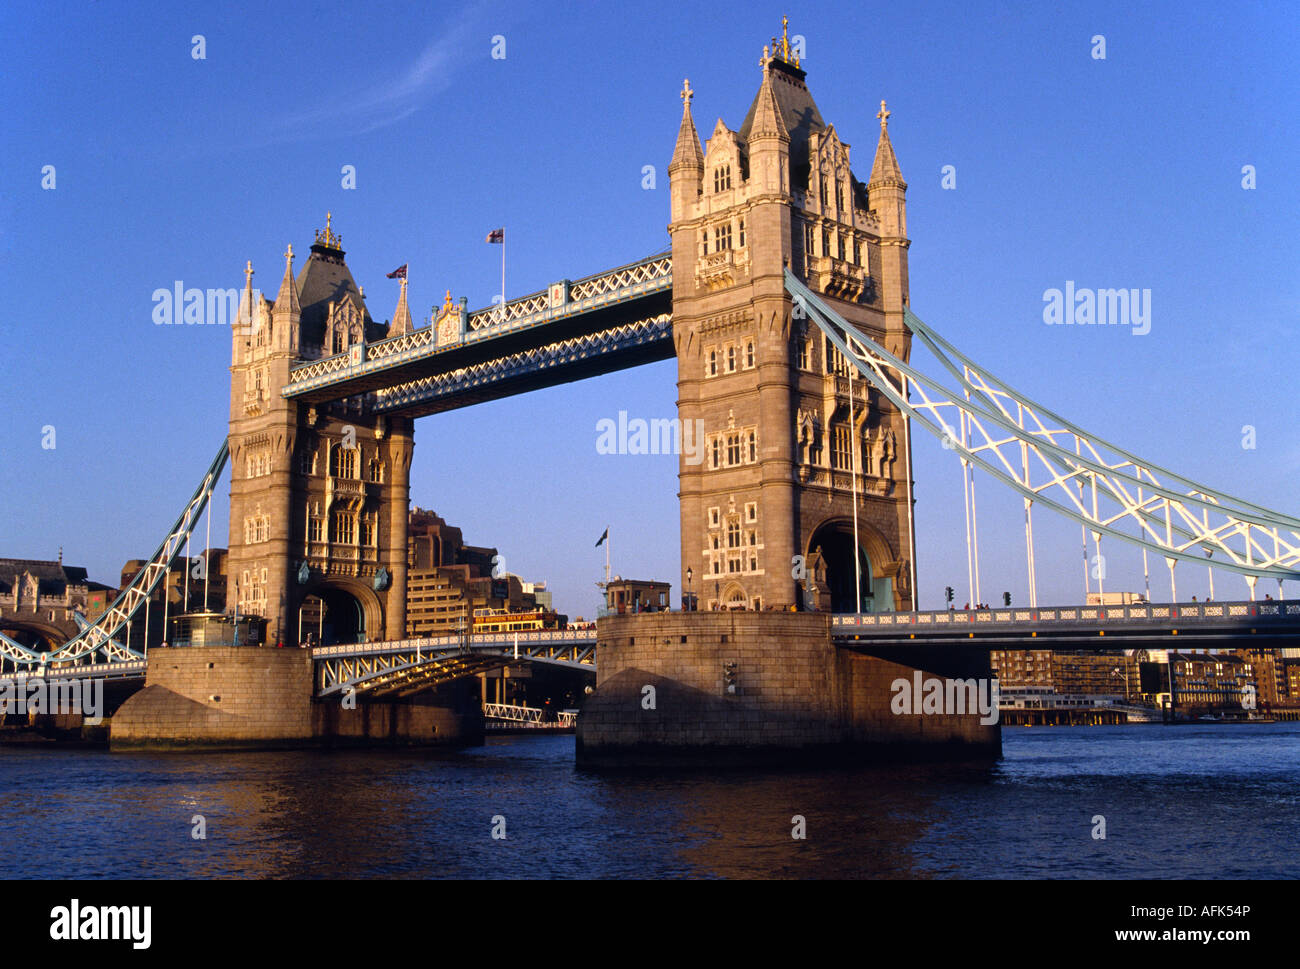 The Tower Bridge crossing the River Thames in central London. The bridge designed by Sir Horace Jones and built in 1894 Stock Photo